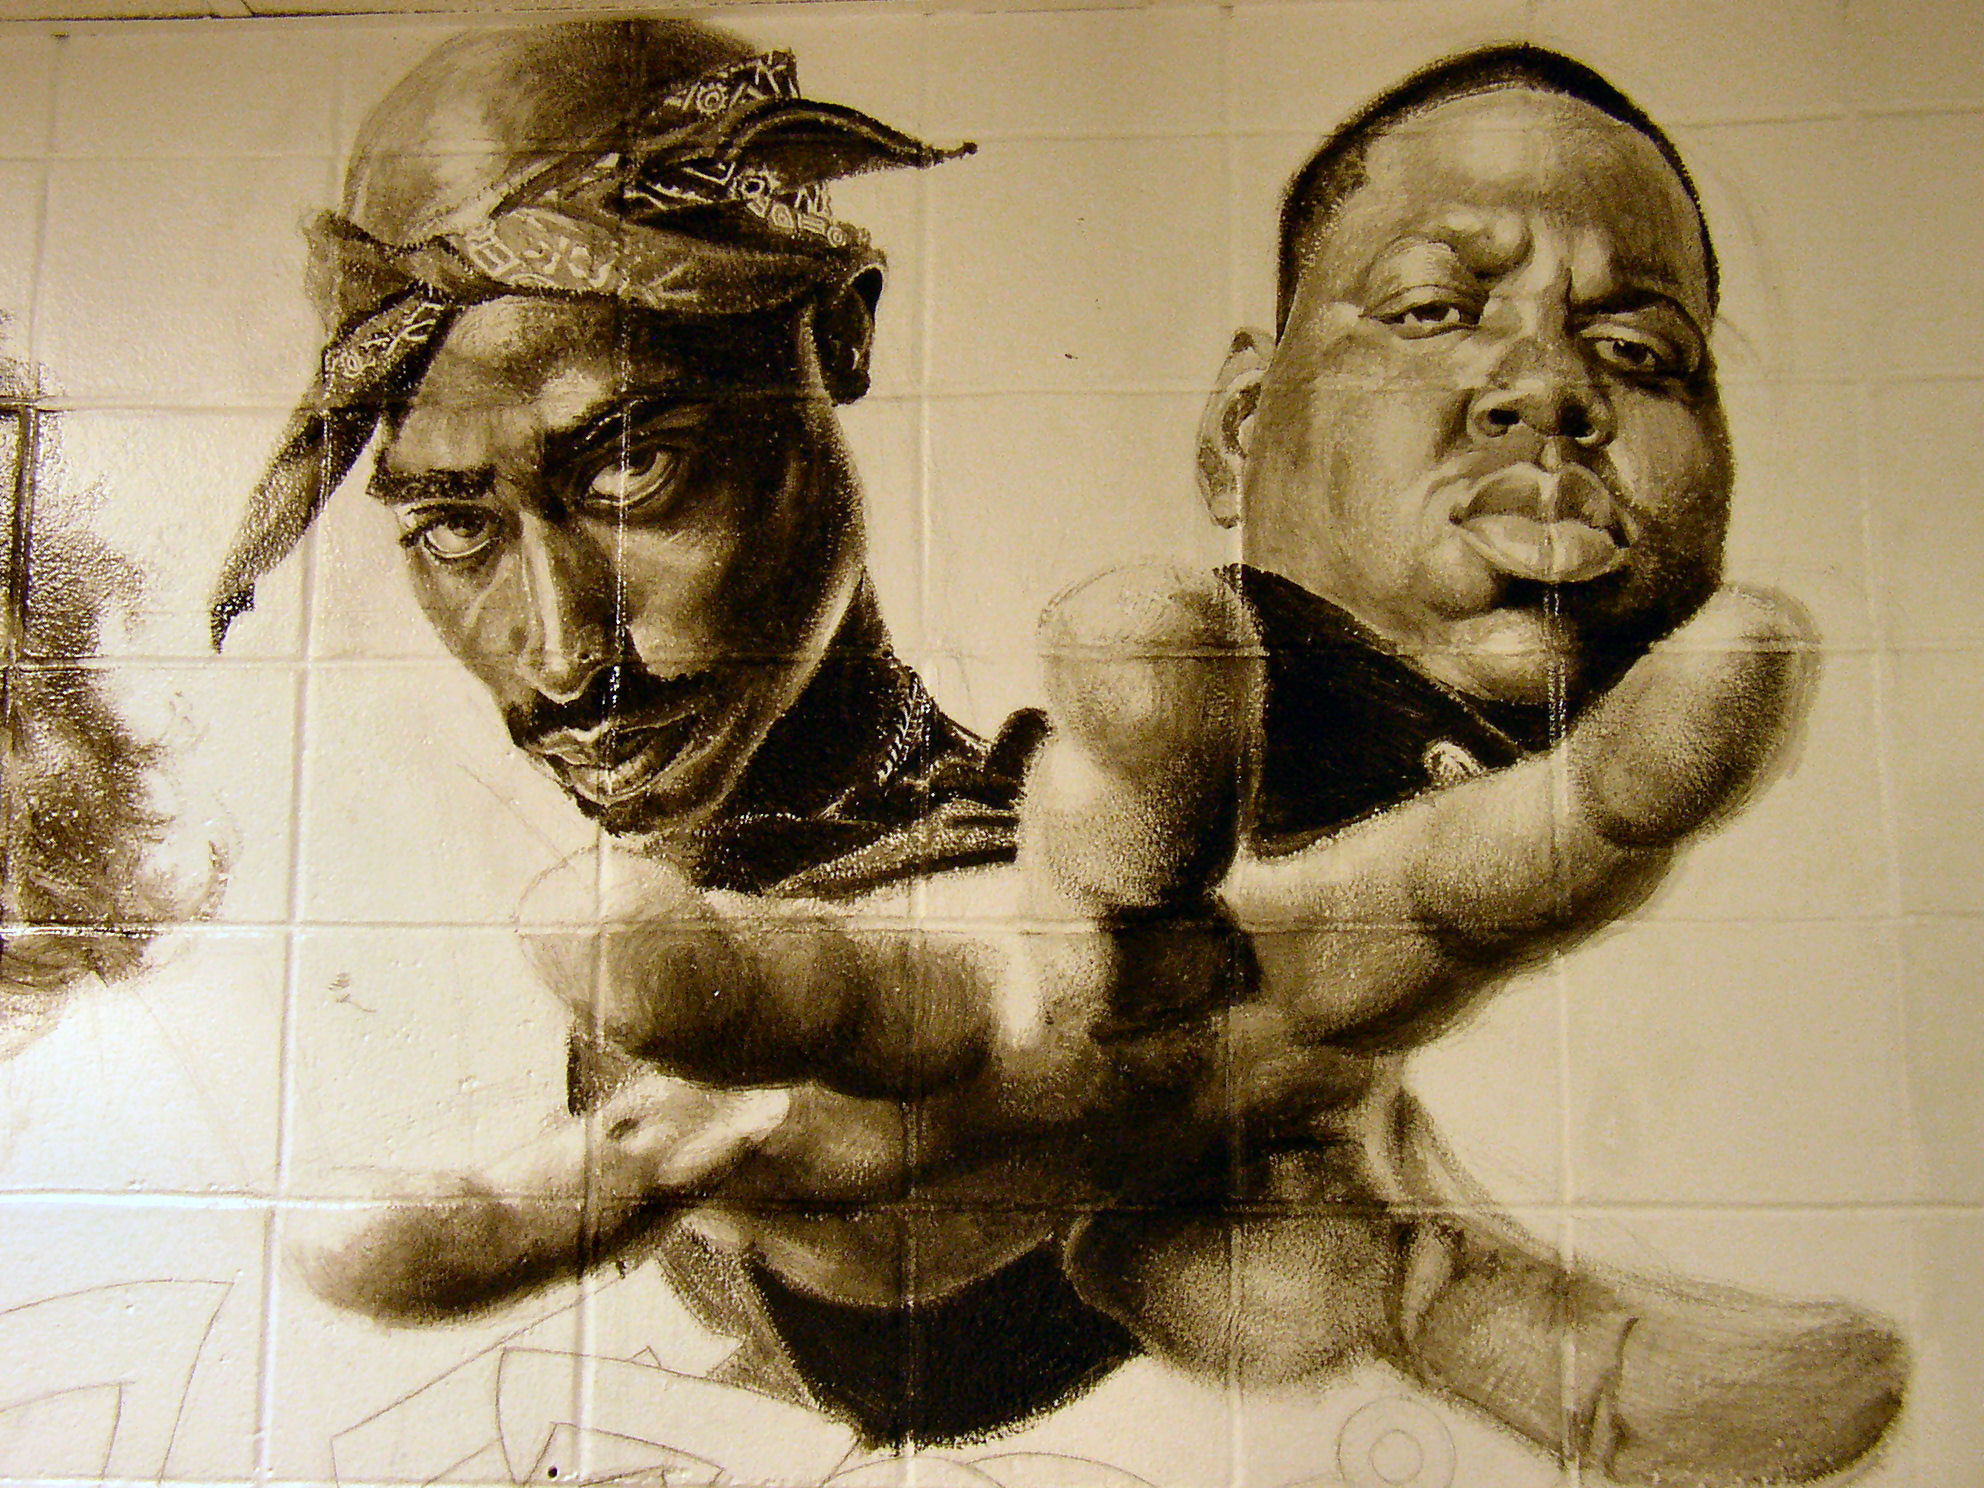 school mural 2Pac and Biggie by deadhead16mb on